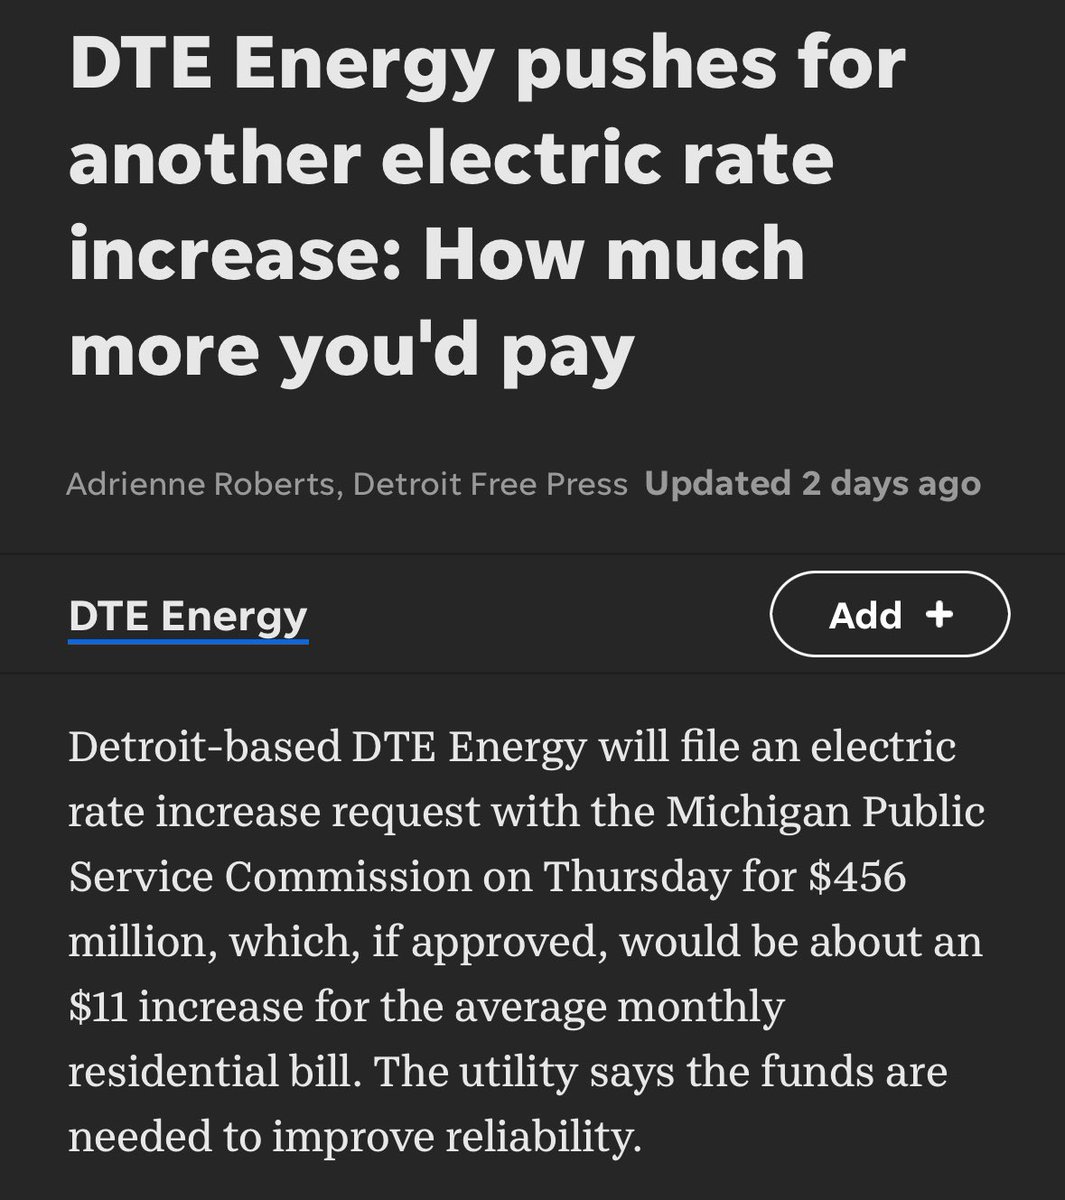 Four months ago, the MPSC approved an over $368,000,000 rate increase for DTE to “improve reliability” Now, DTE is asking for another $456,000,000 rate hike to “improve reliability” DTE has spent TENS of MILLIONS lobbying and donating to politicians in Lansing. Perhaps they…